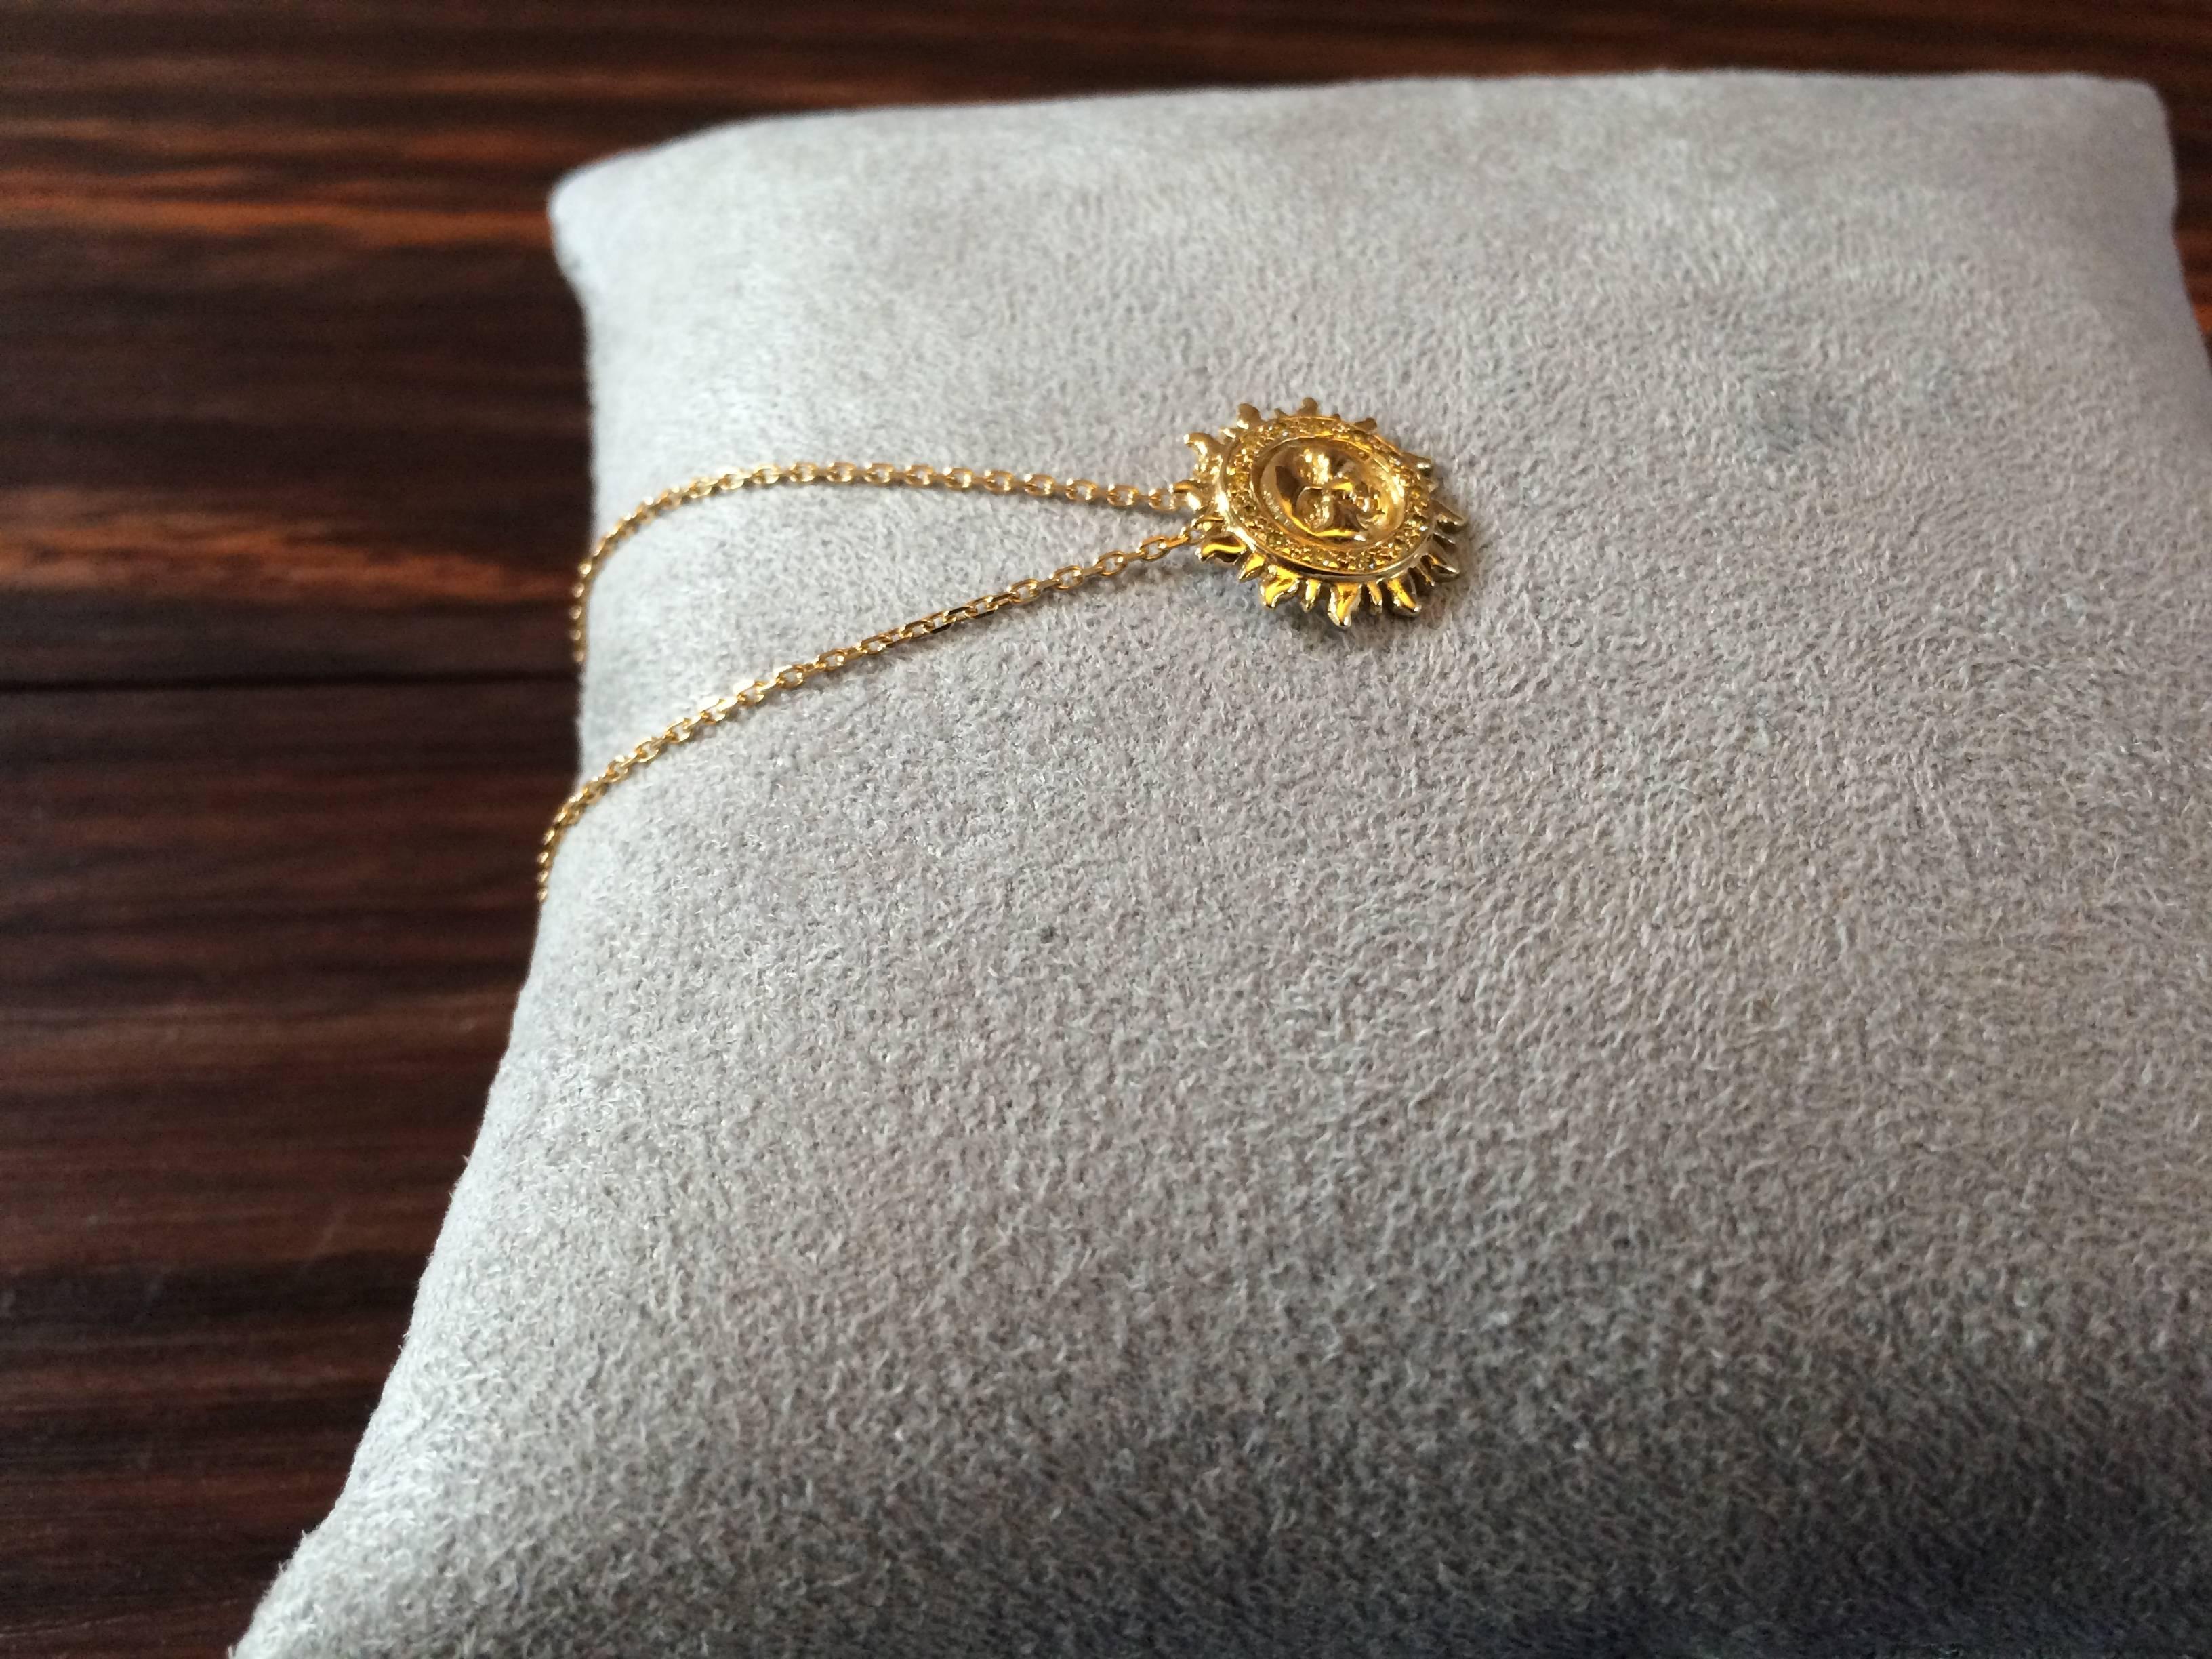 This pendant has been handcrafted from 18ct yellow gold and is pave set with 0.15ct natural canary yellow diamonds.

The total length of the chain is 40cm or 16 inches
Diameter of sun: 1.4cm

This piece is made to order and takes approximately 4